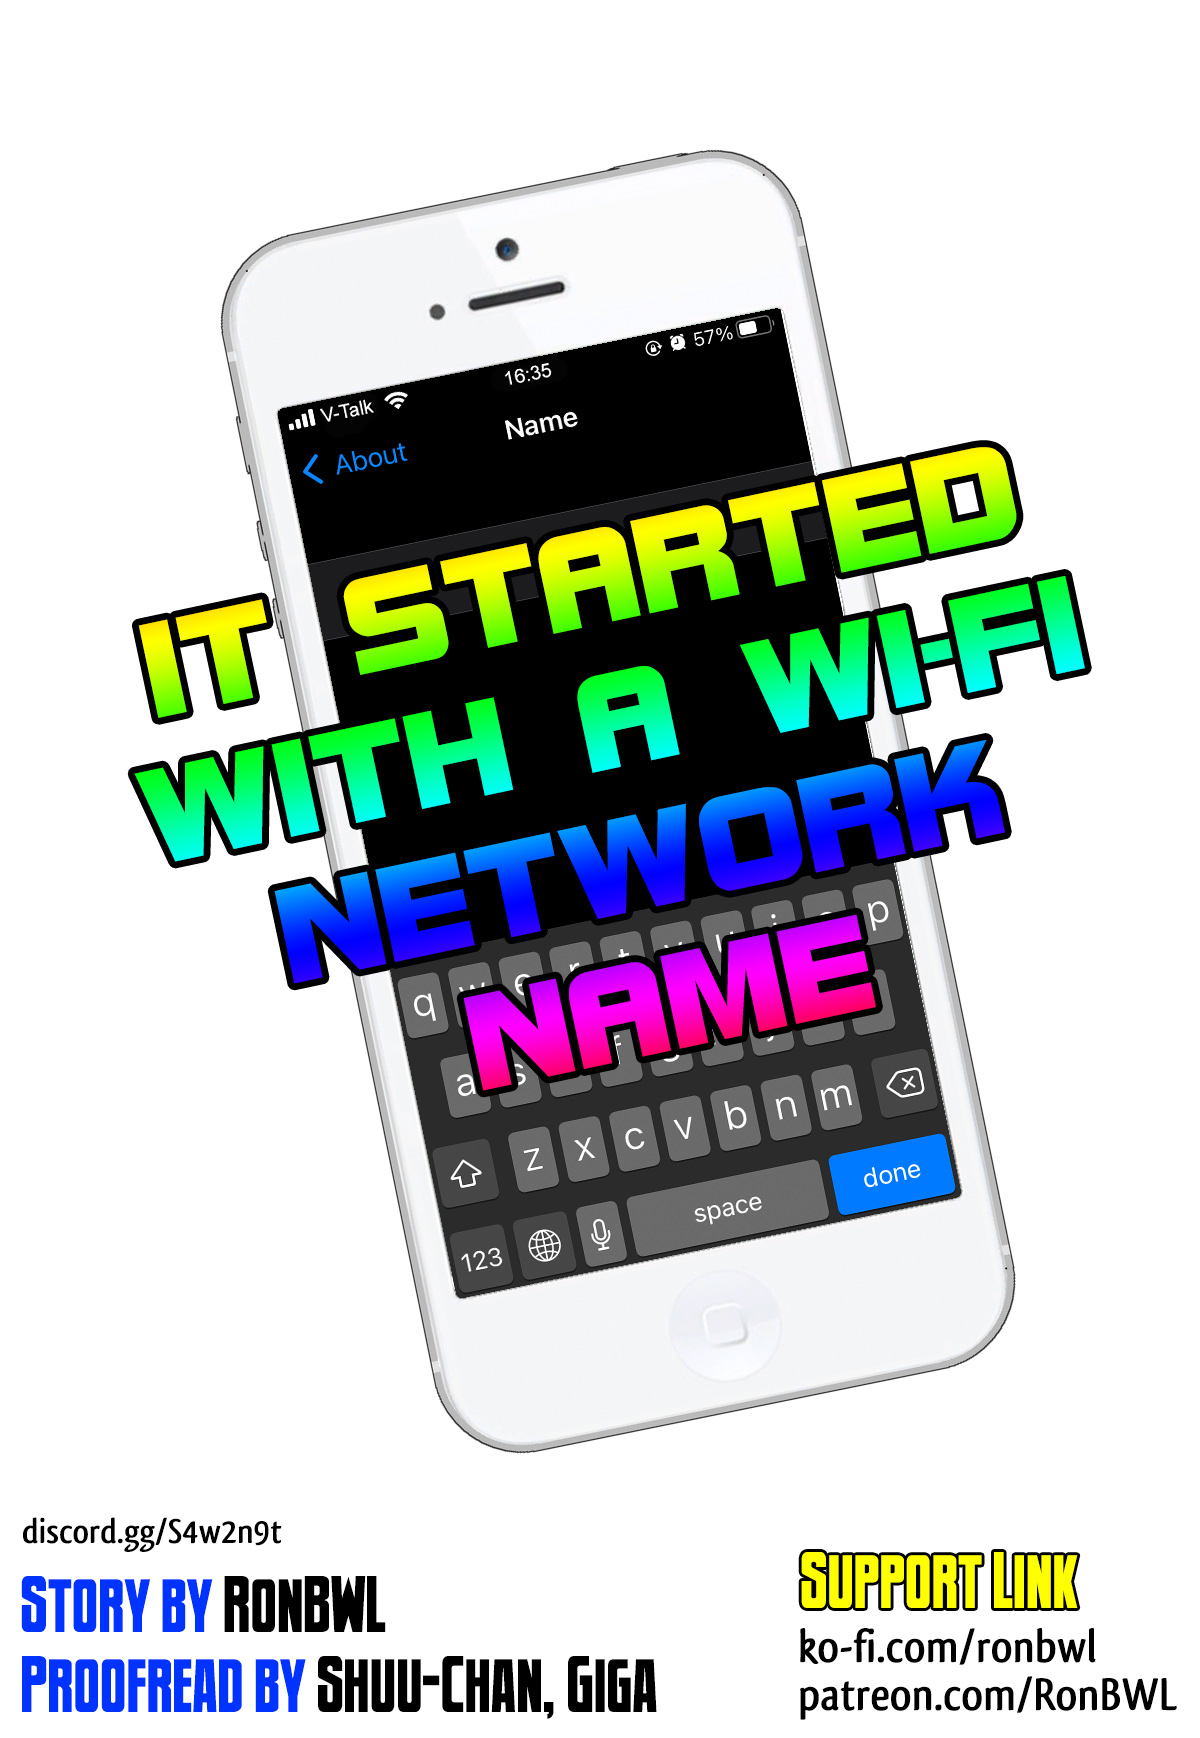 It started with a Wi-Fi network name 27